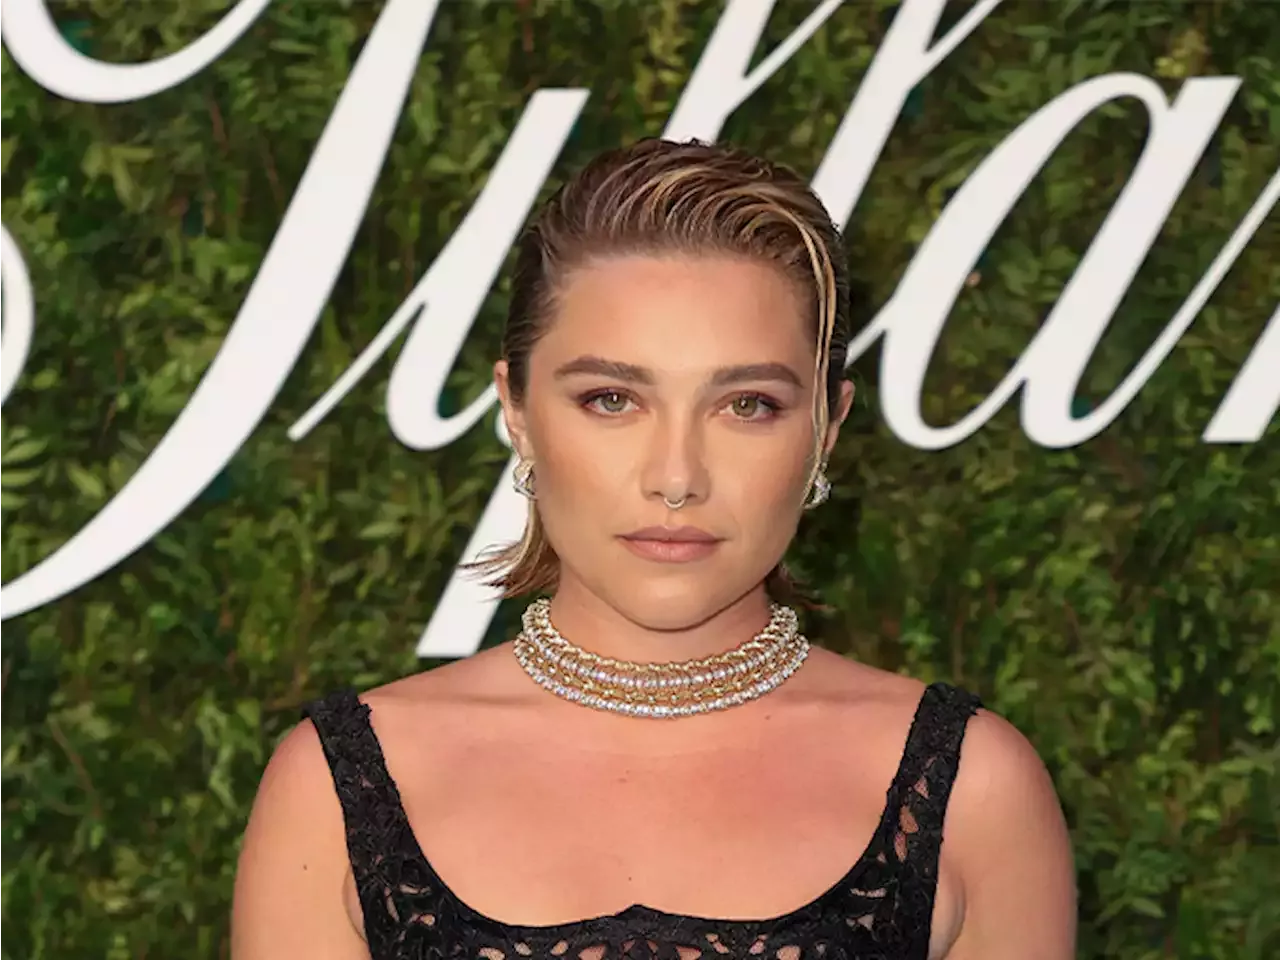 Florence Pugh Wore A Completely Sheer Top With No Bra Sent An Important Message To All The Haters